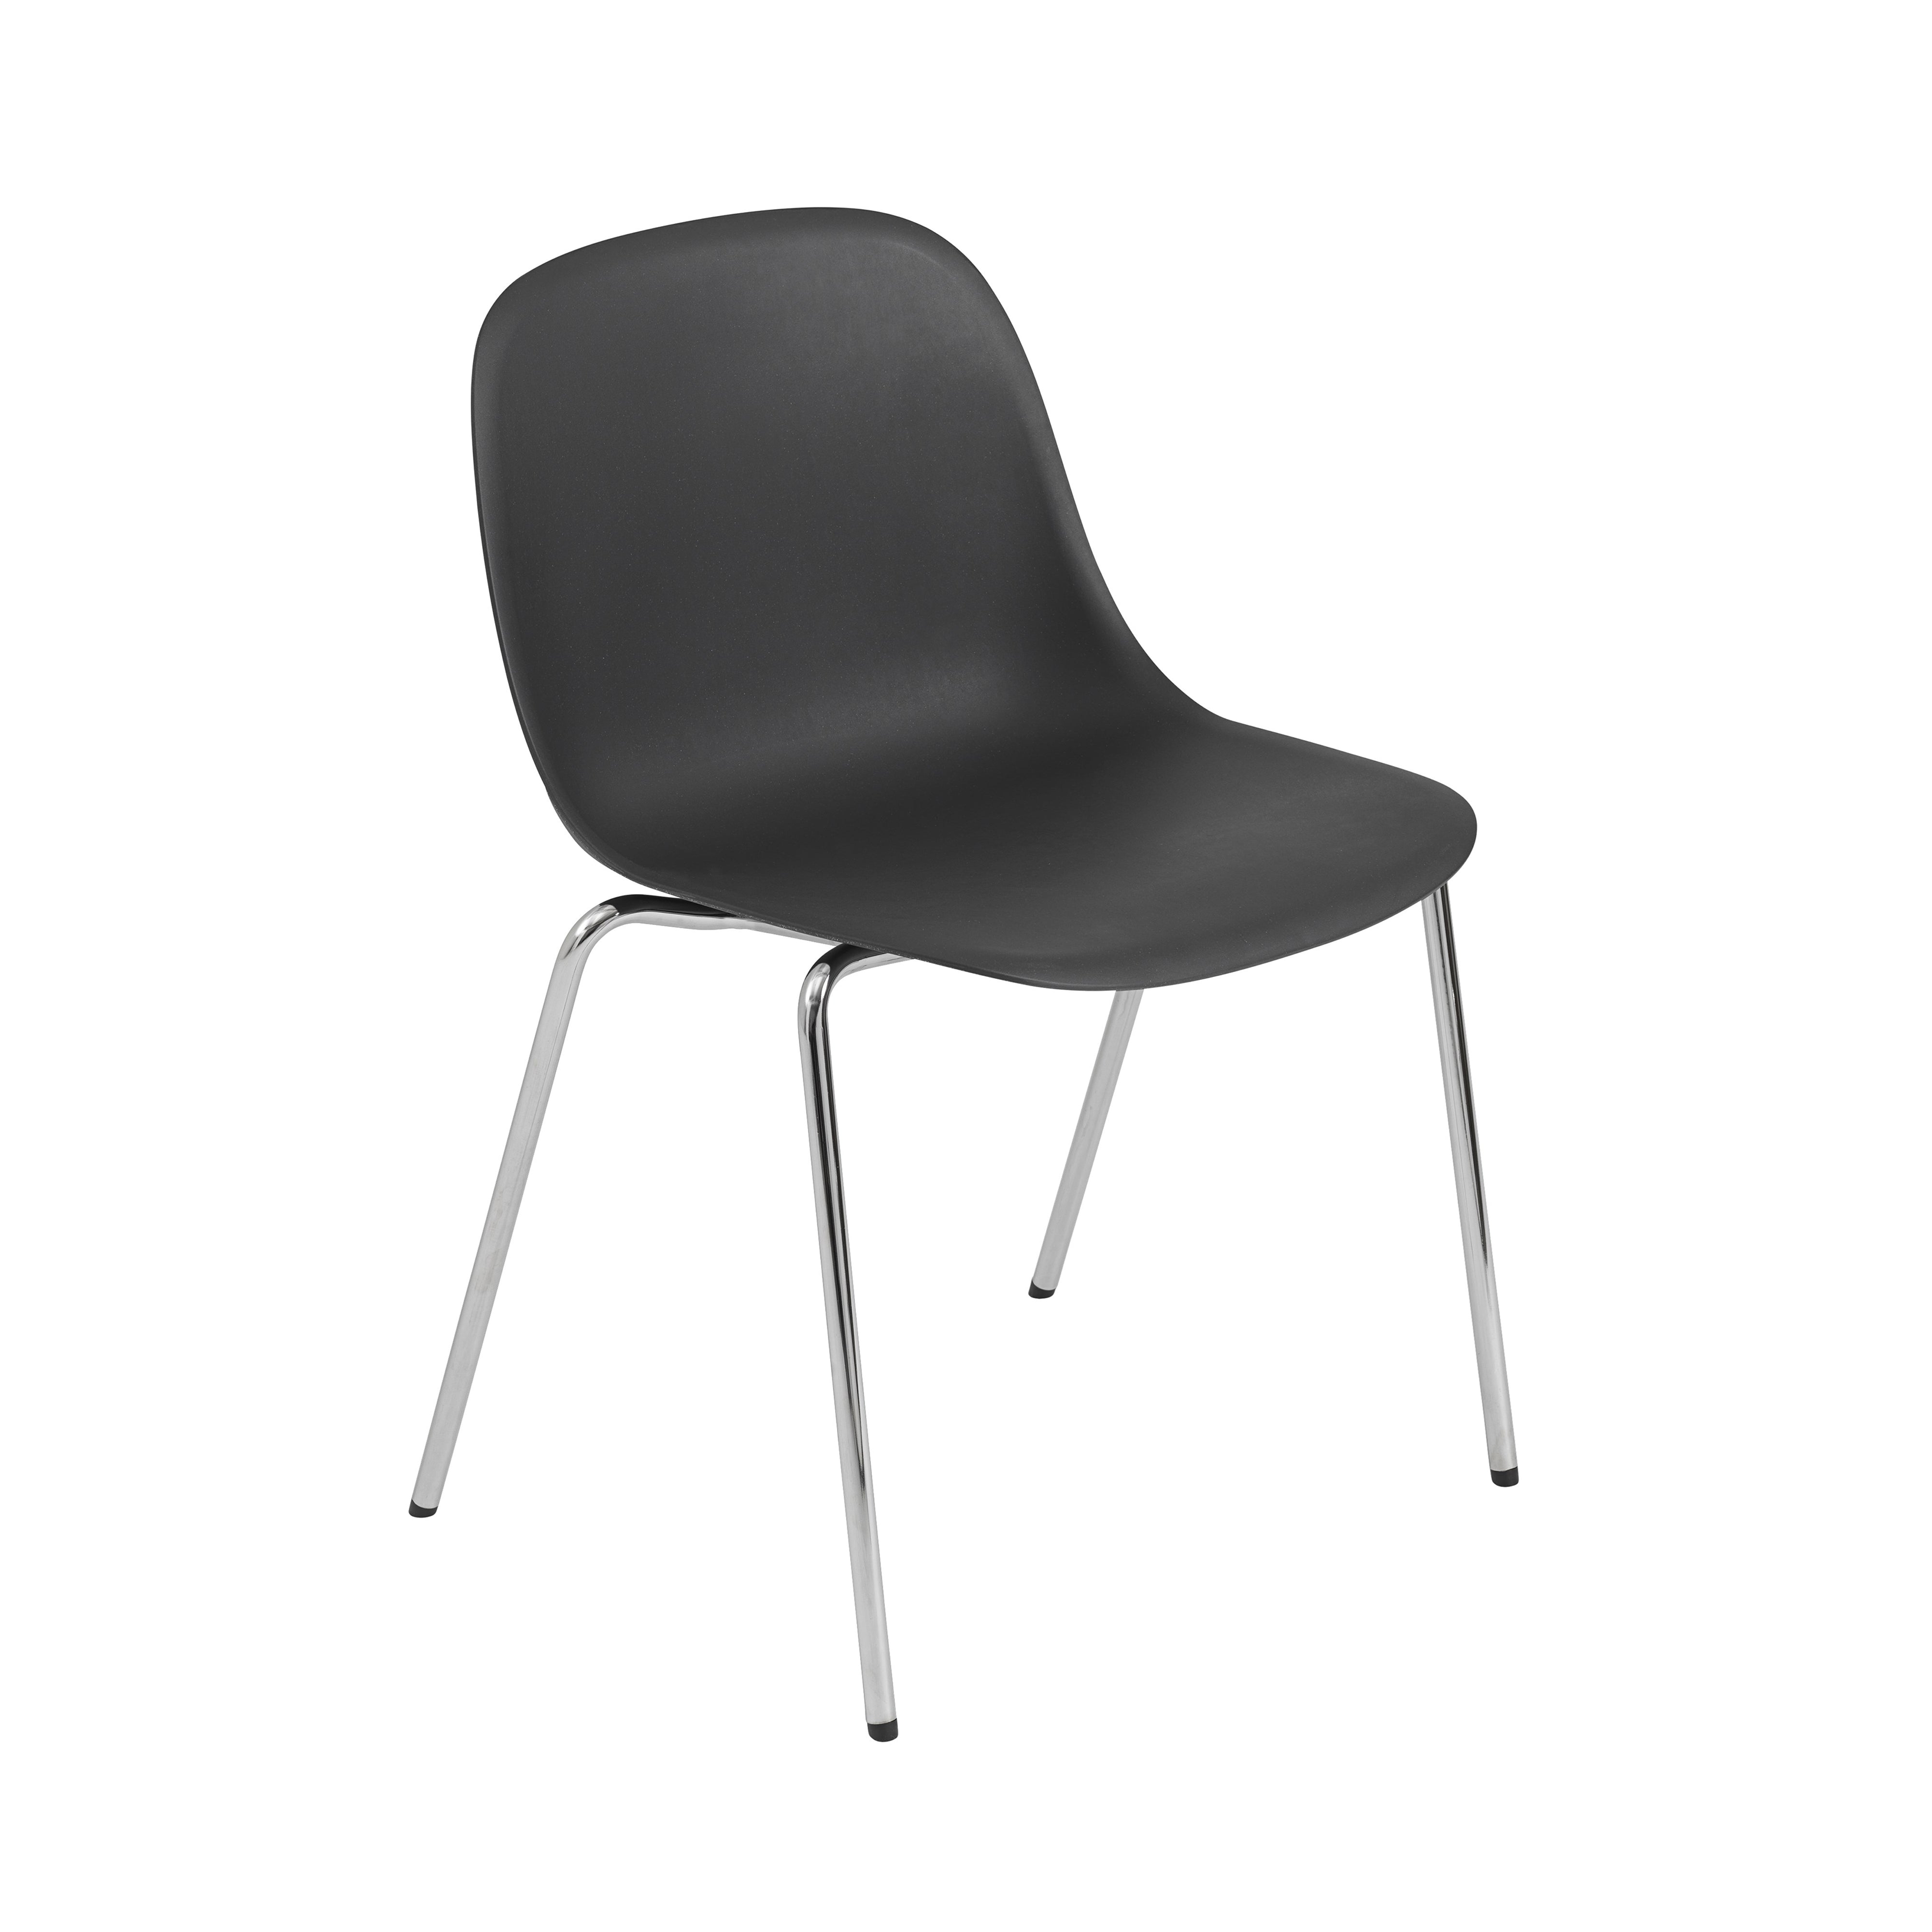 Fiber Side Chair: A-Base with Glides + Black